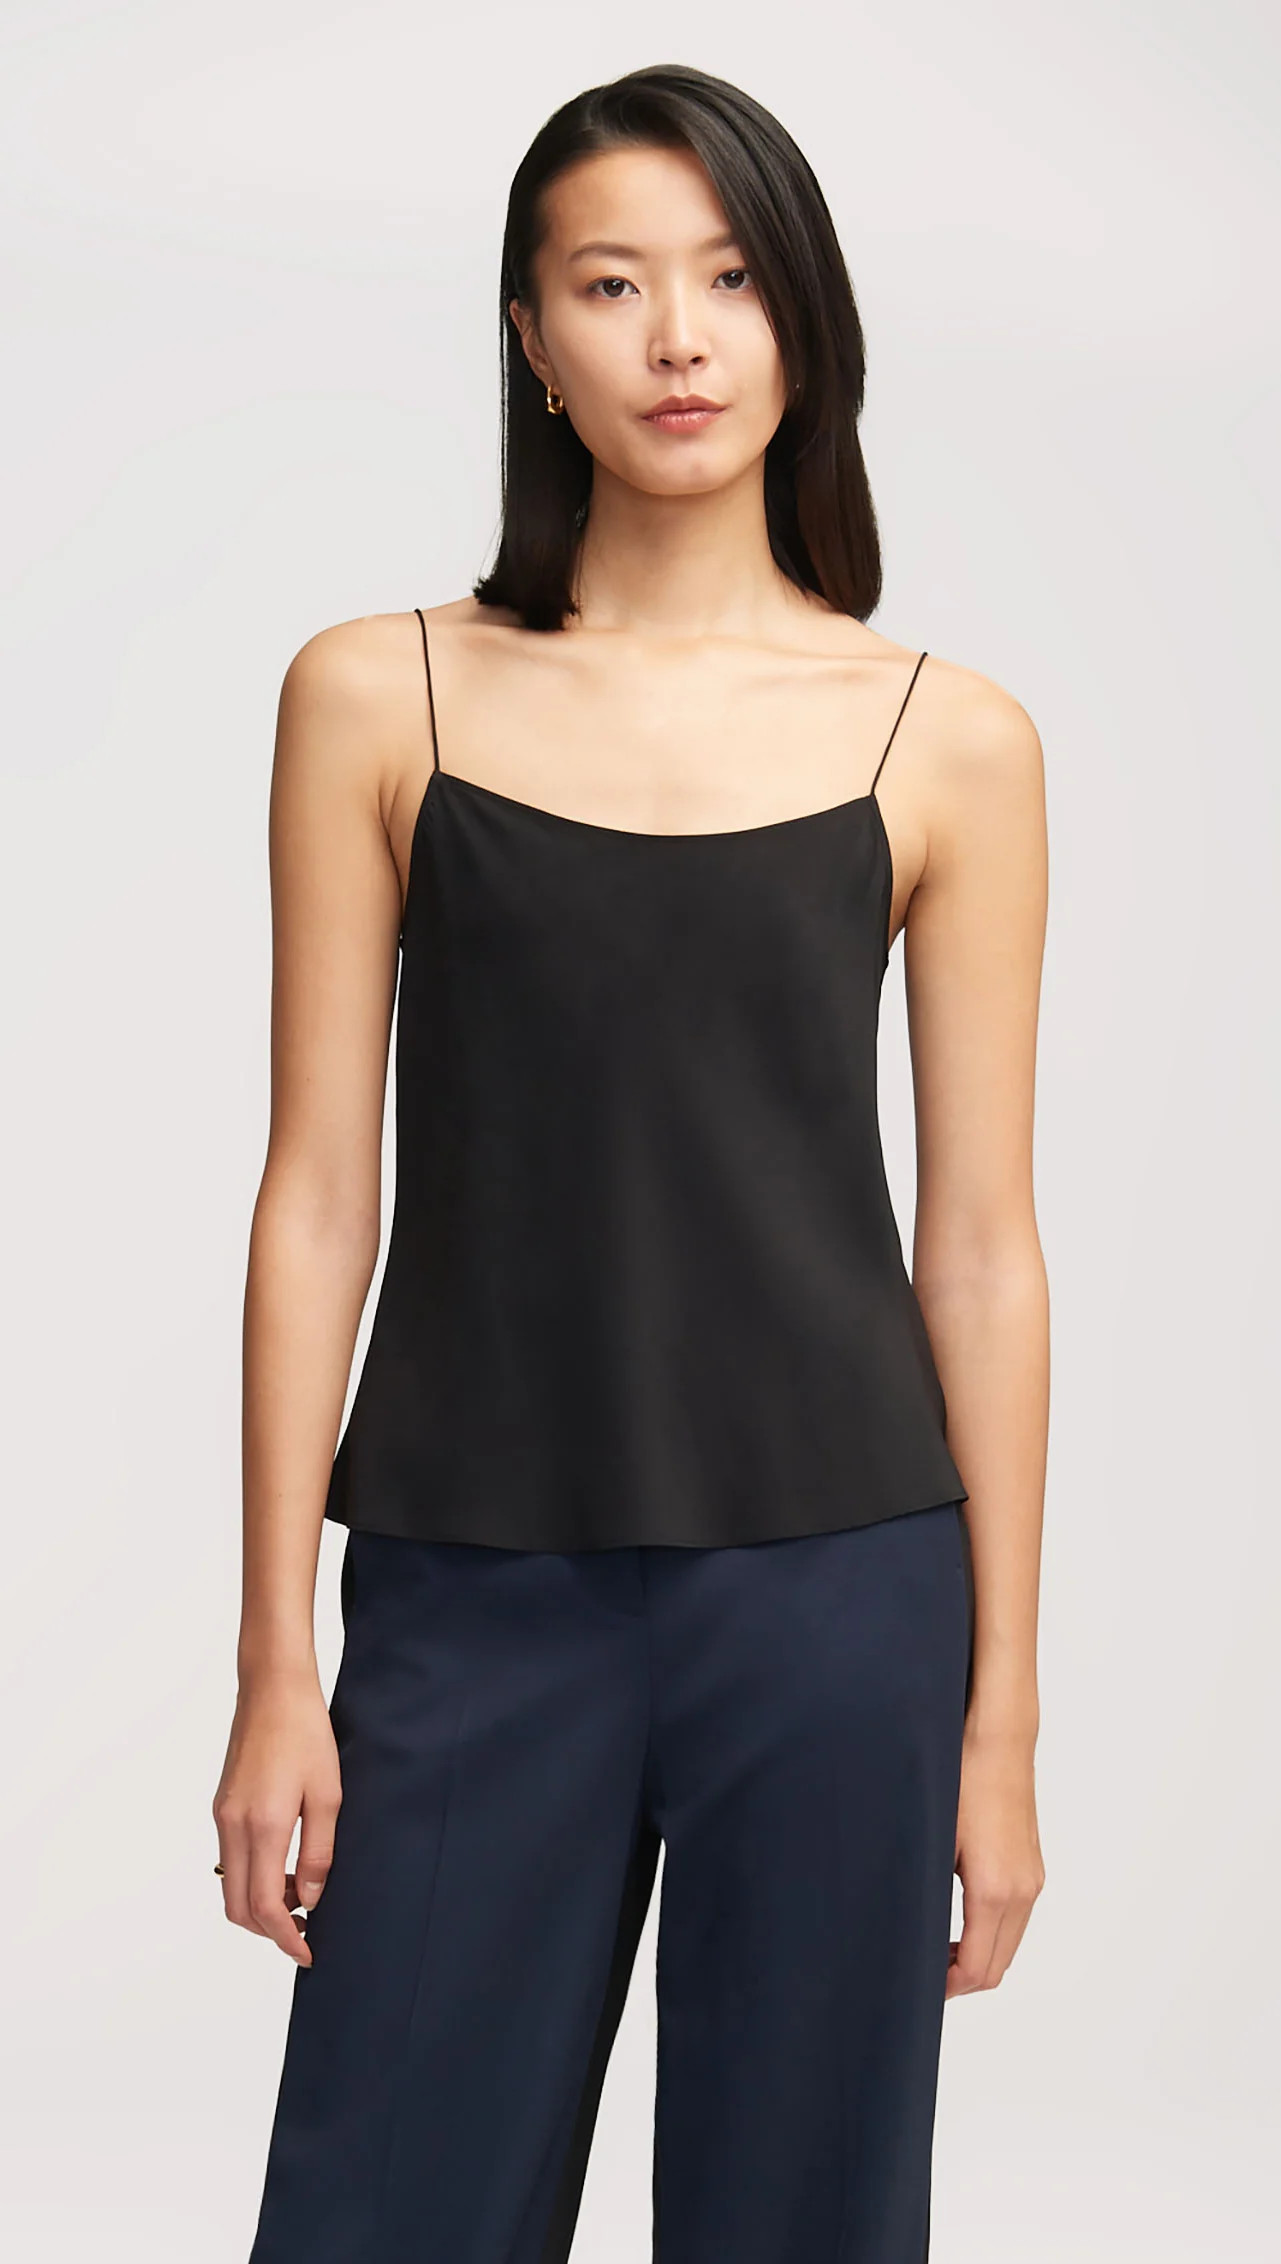 Argent: Camisole in Matte-side Silk Charmeuse | Women's Tops | Argent | Argent